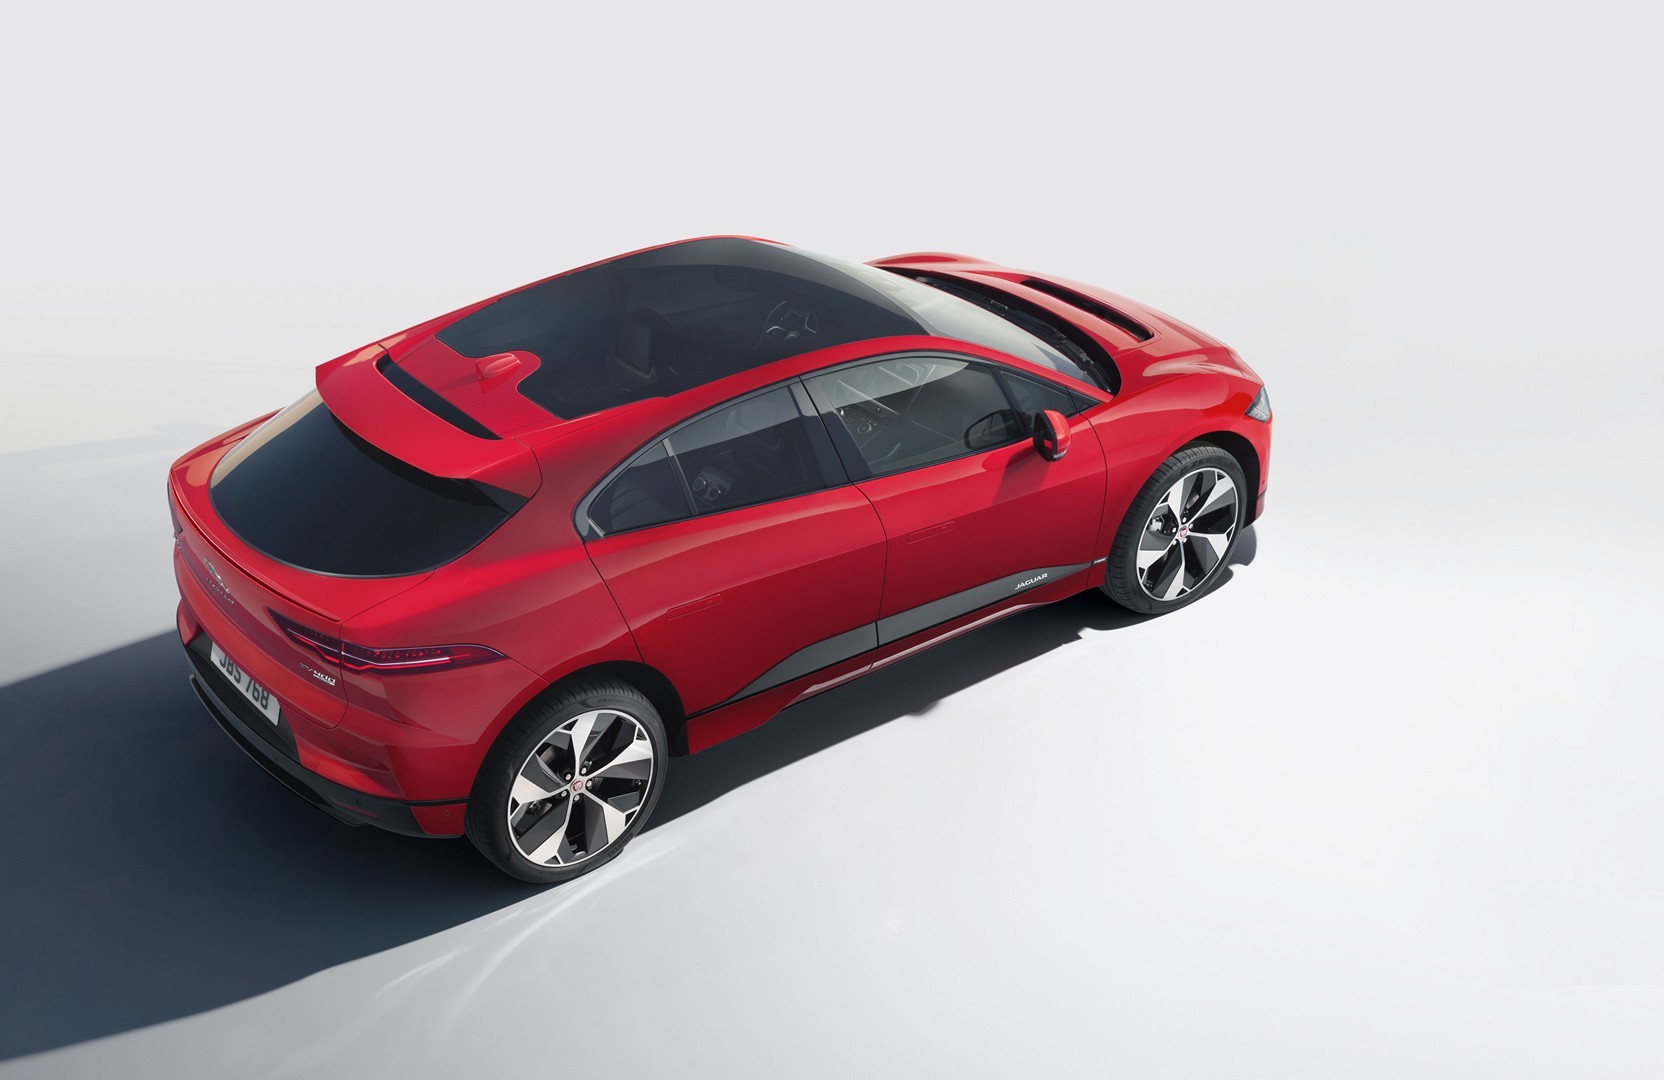 https://s1.cdn.autoevolution.com/images/news/gallery/2020-jaguar-i-pace-update-offers-234-miles-of-range-thanks-to-etrophy-know-how_83.jpg